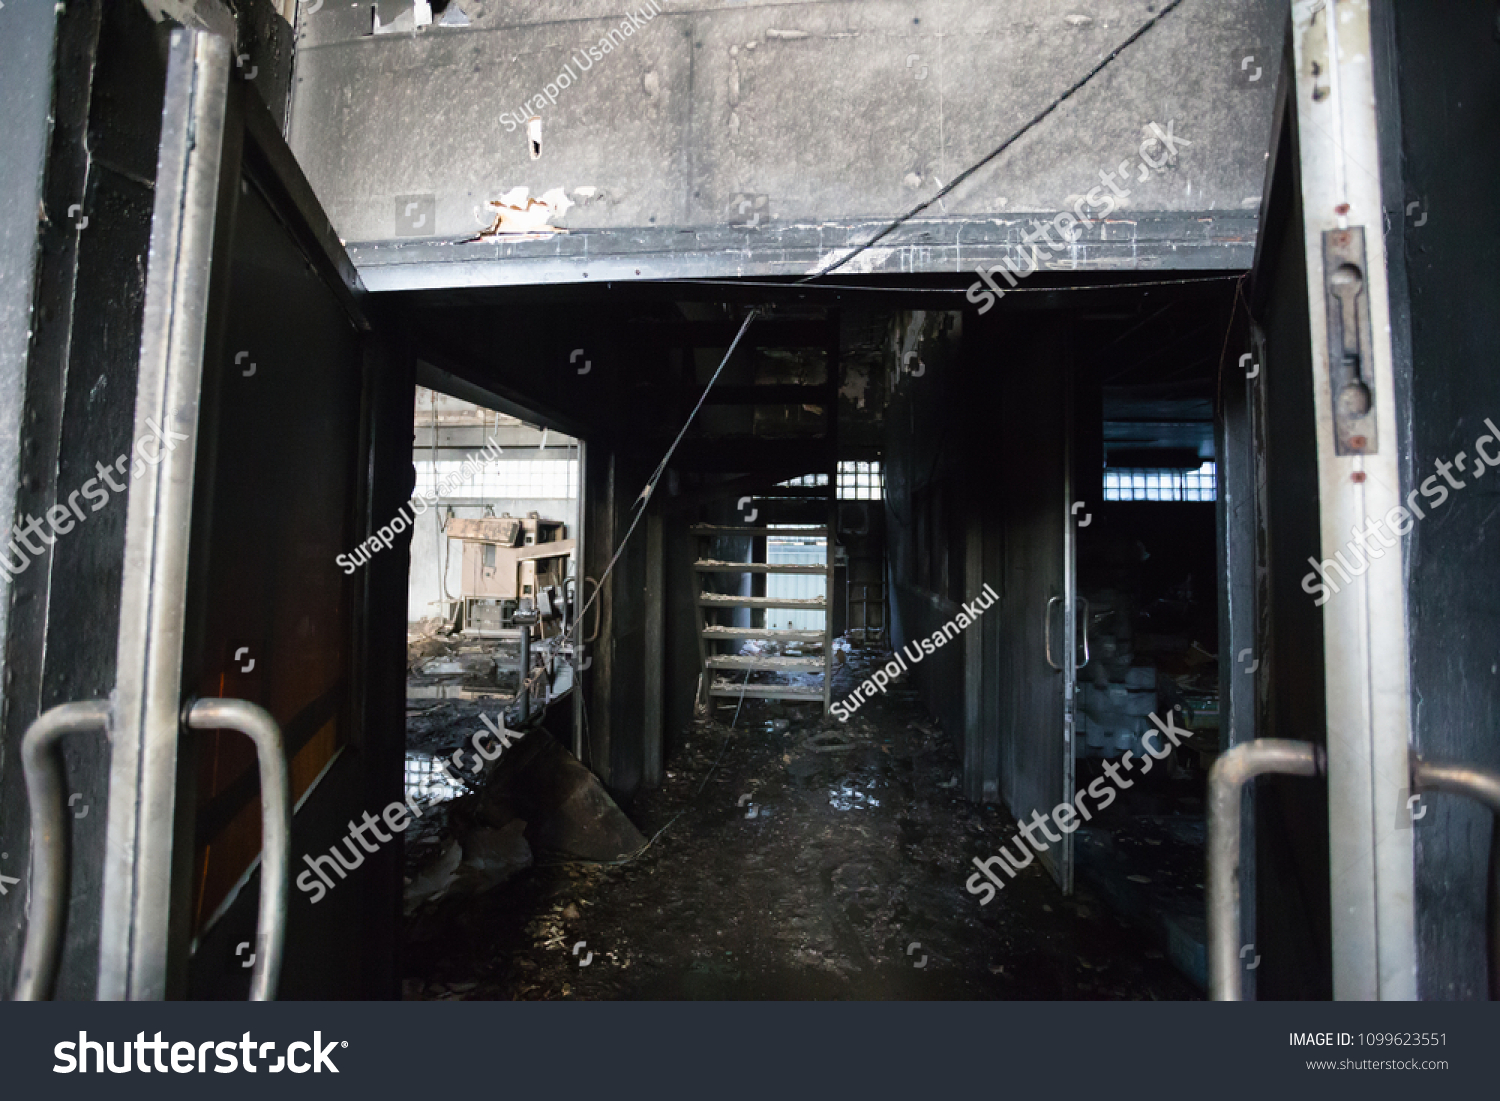 Interior of a factory damaged by fire / Damage caused by fire - Burnt interior #1099623551